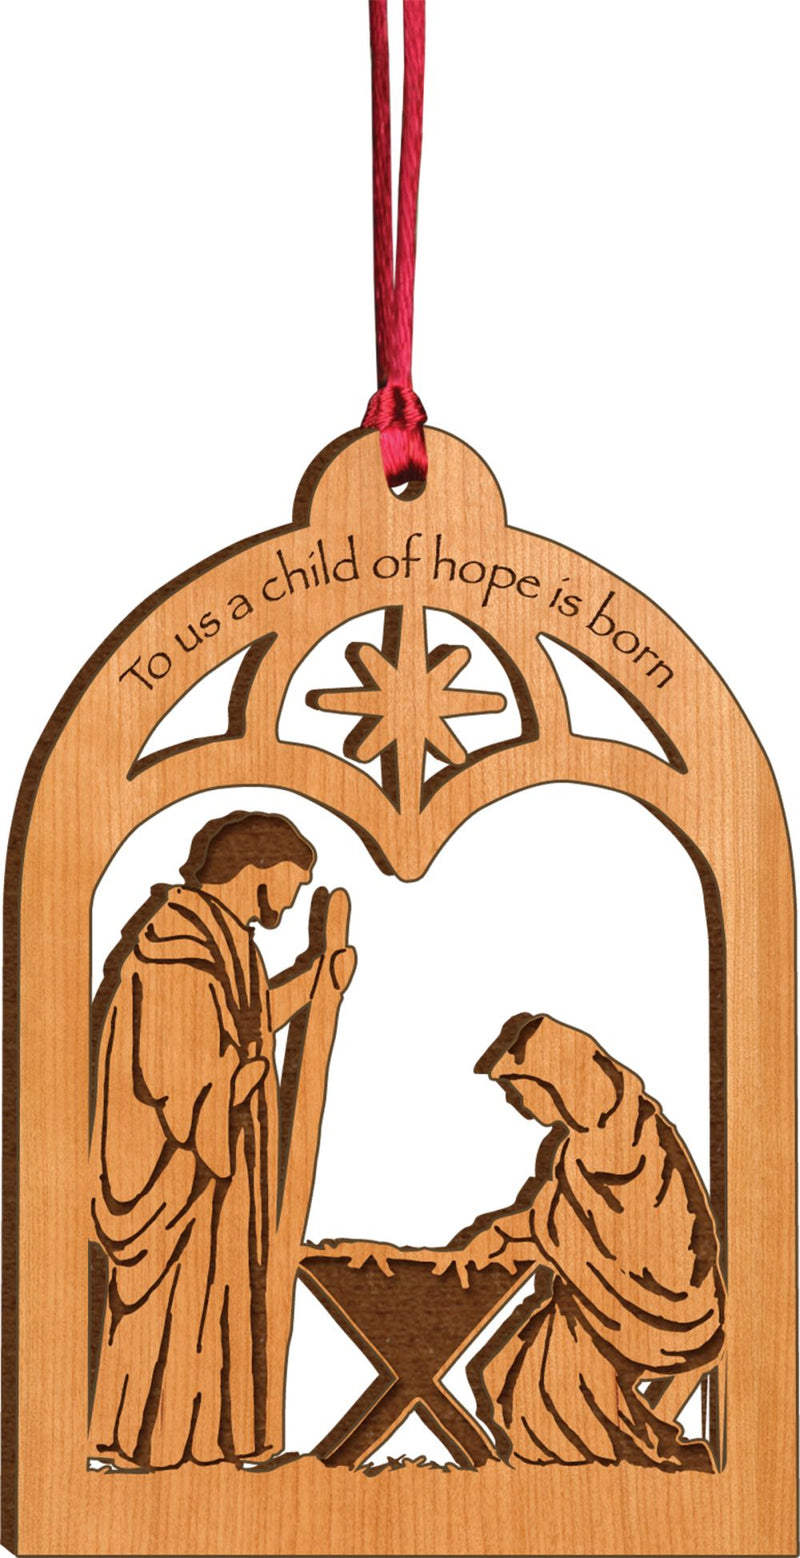 To us a child of hope is born - Ornament